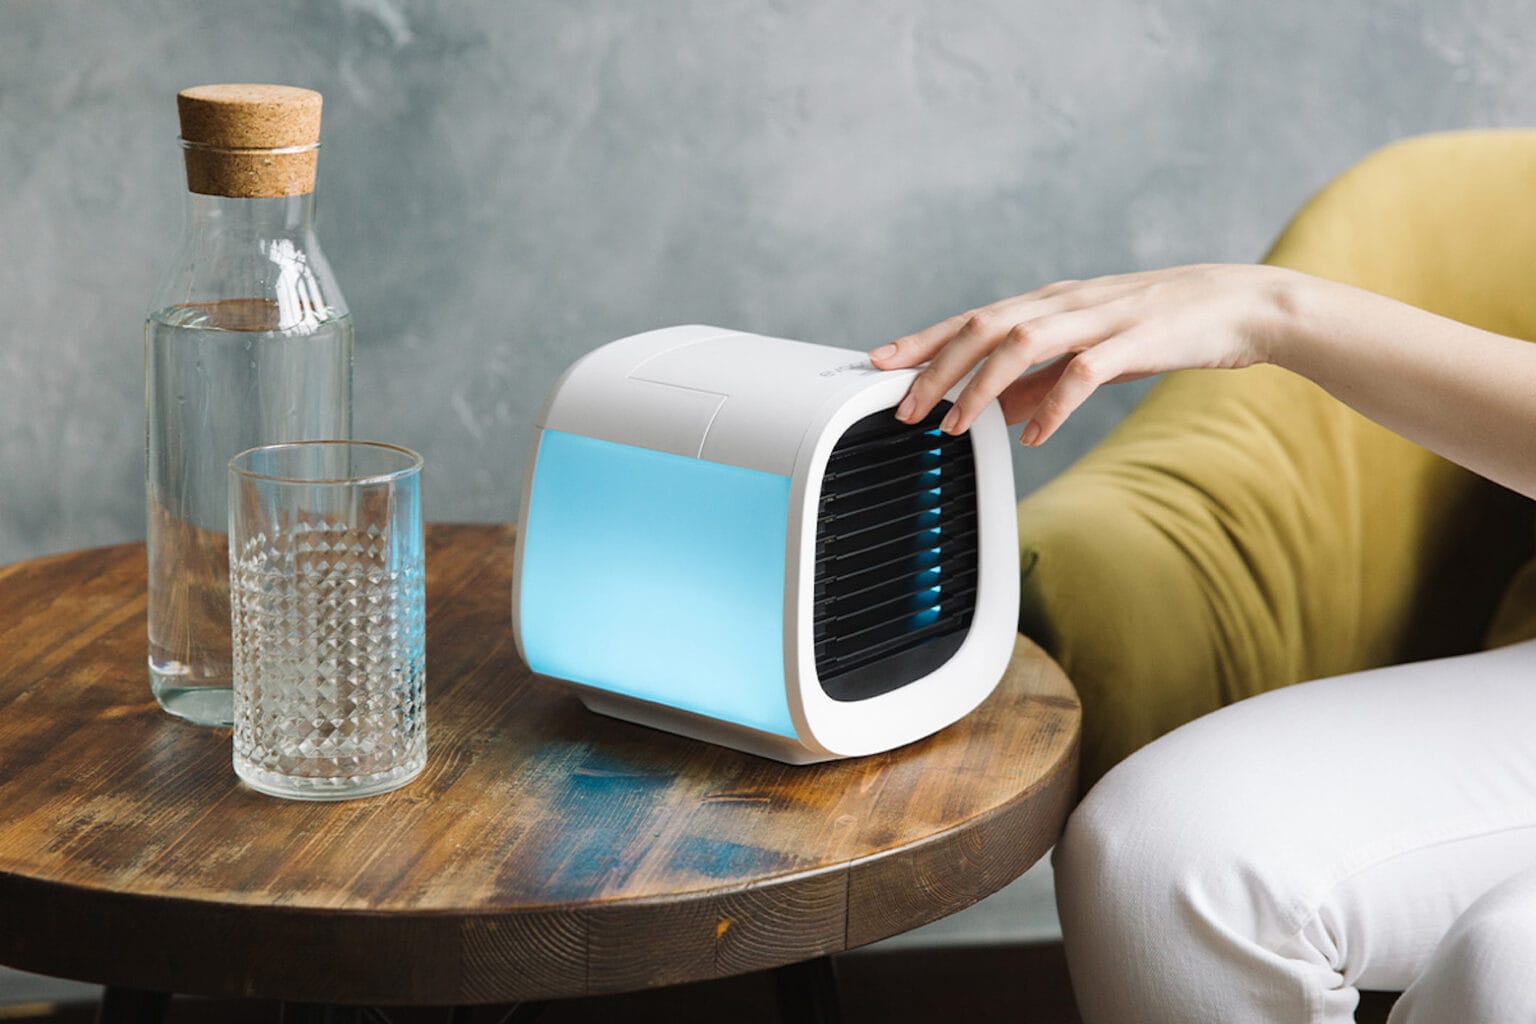 This mini AC unit can cool your bed.